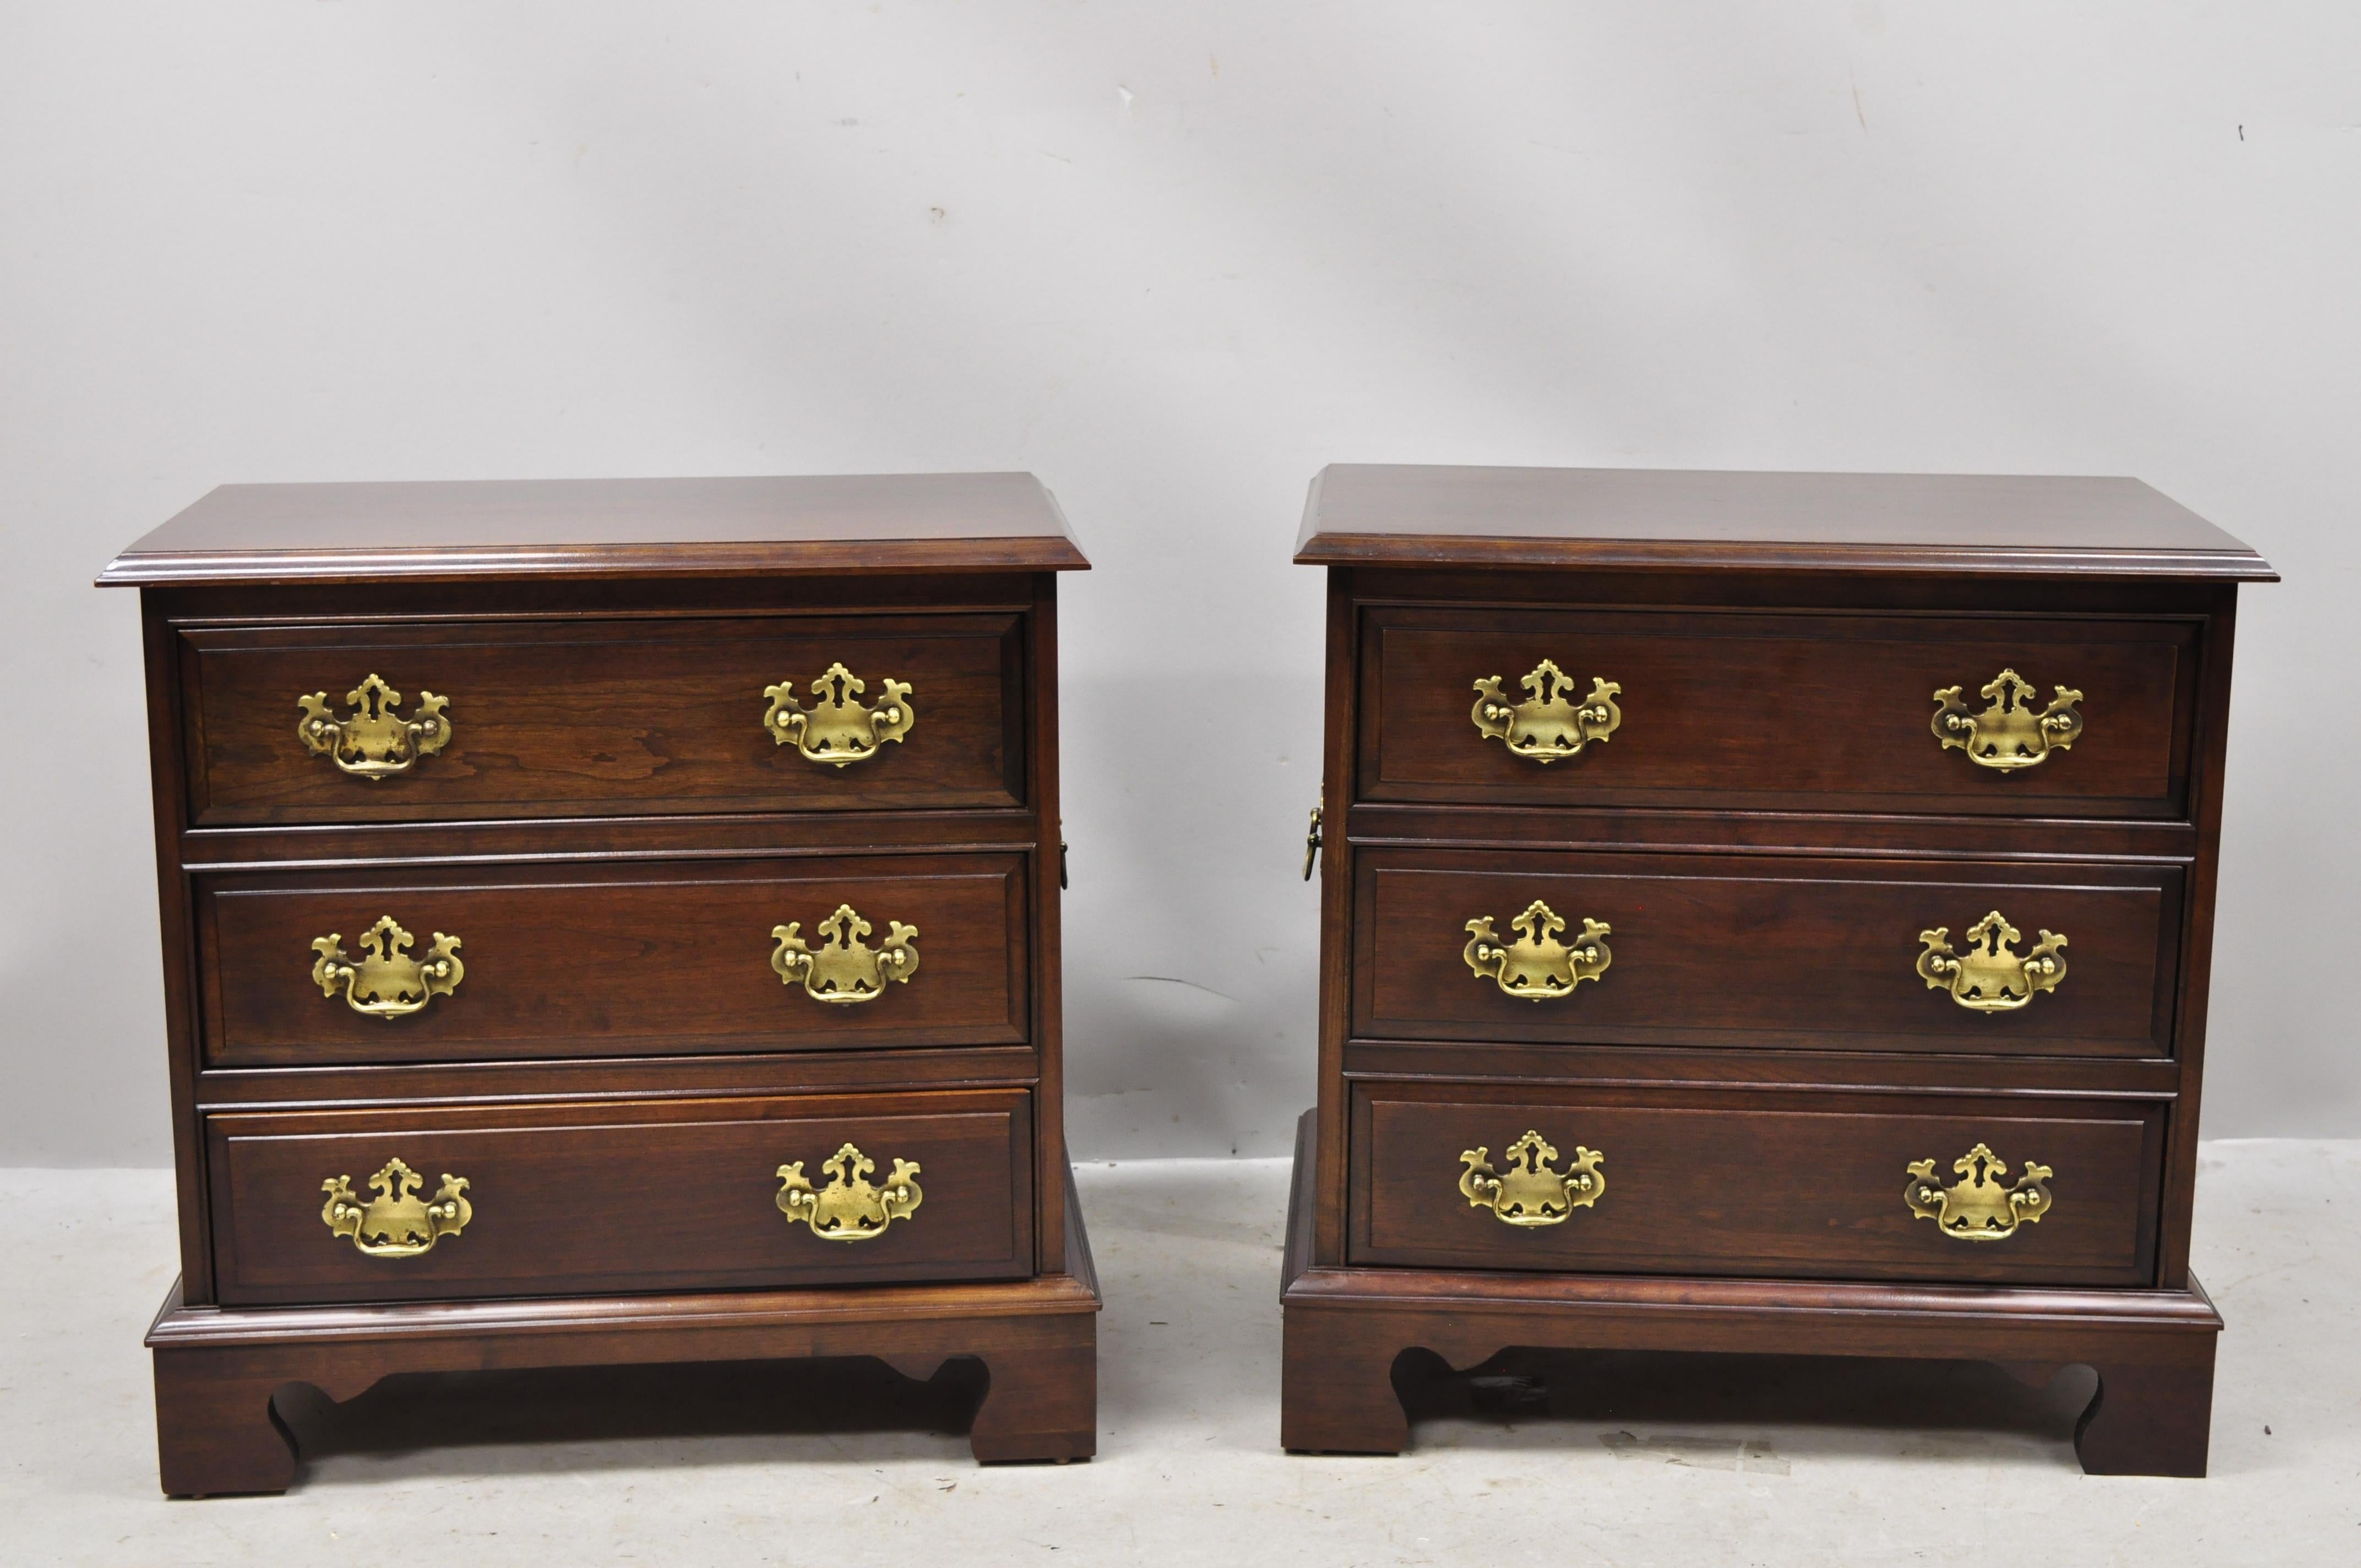 Vintage Pennsylvania House cherrywood Chippendale bachelor chest side table nightstands, a pair. Item features solid wood construction, beautiful wood grain, 3 dovetailed drawers, solid brass hardware, quality American craftsmanship, circa mid to